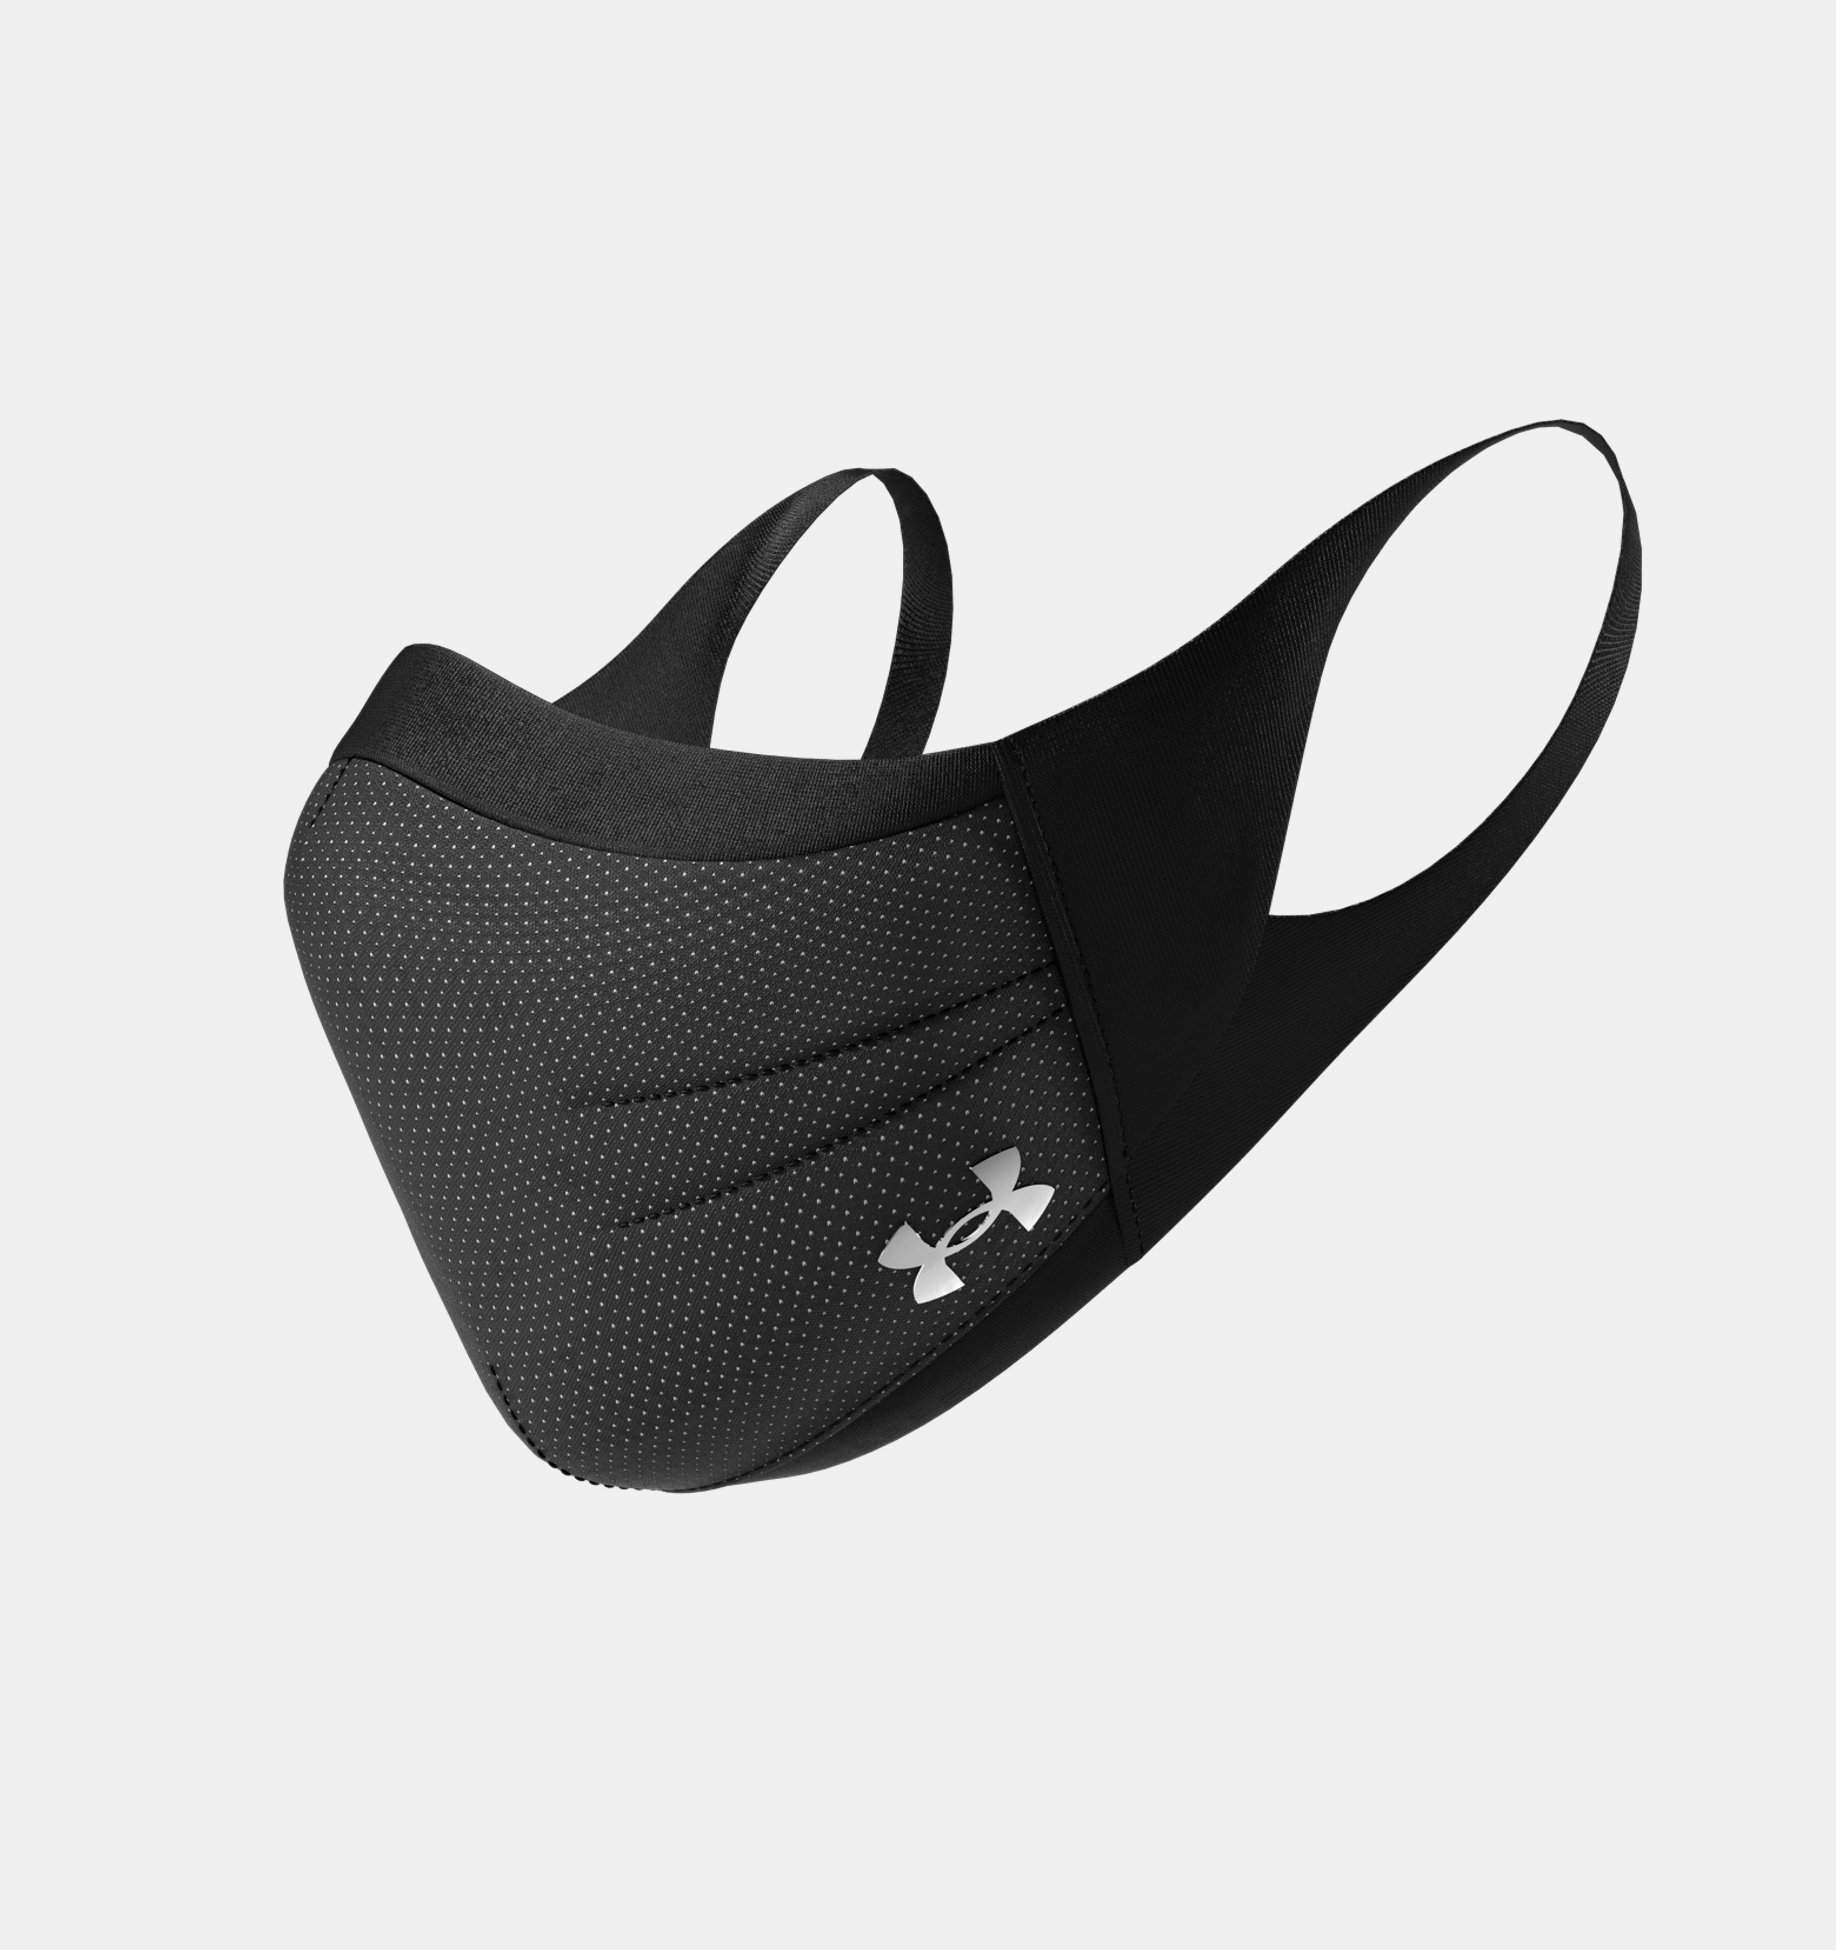 Sports face mask